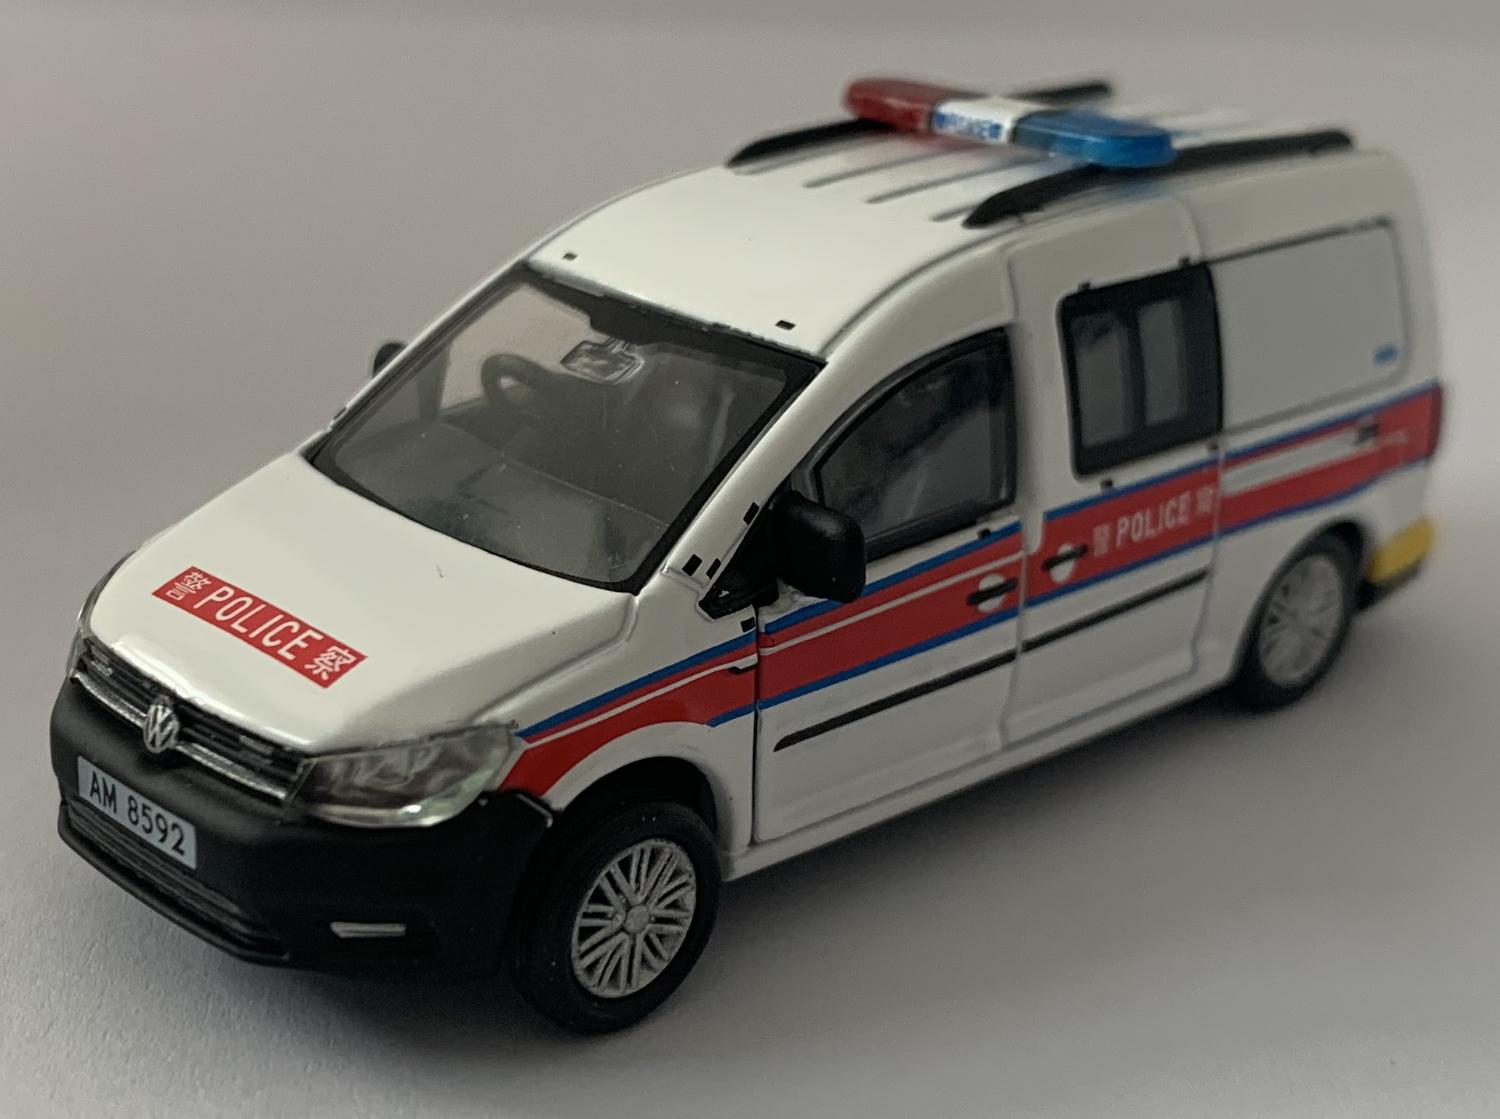 An excellent scale model of a VW Caddy Hong Kong Police decorated in authentic Hong Kong Police livery,